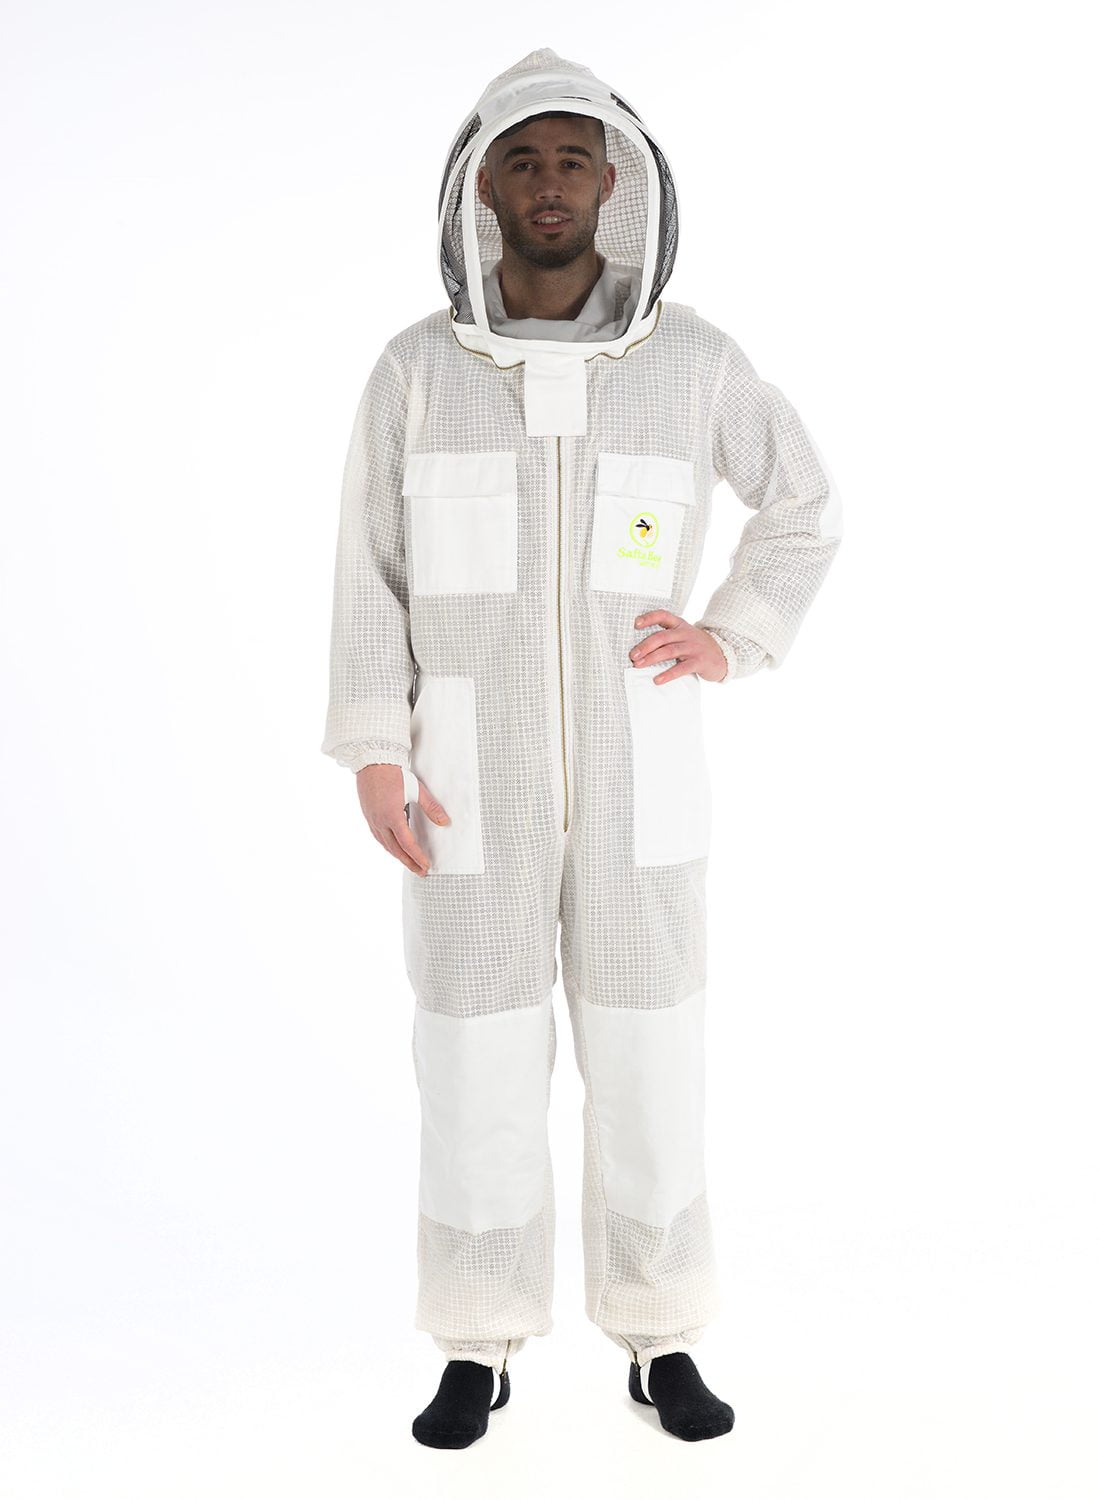 Details about   3 Layers Extra Ordinary Features Pilot Beekeeping Suit Ultra Ventilated Size M 